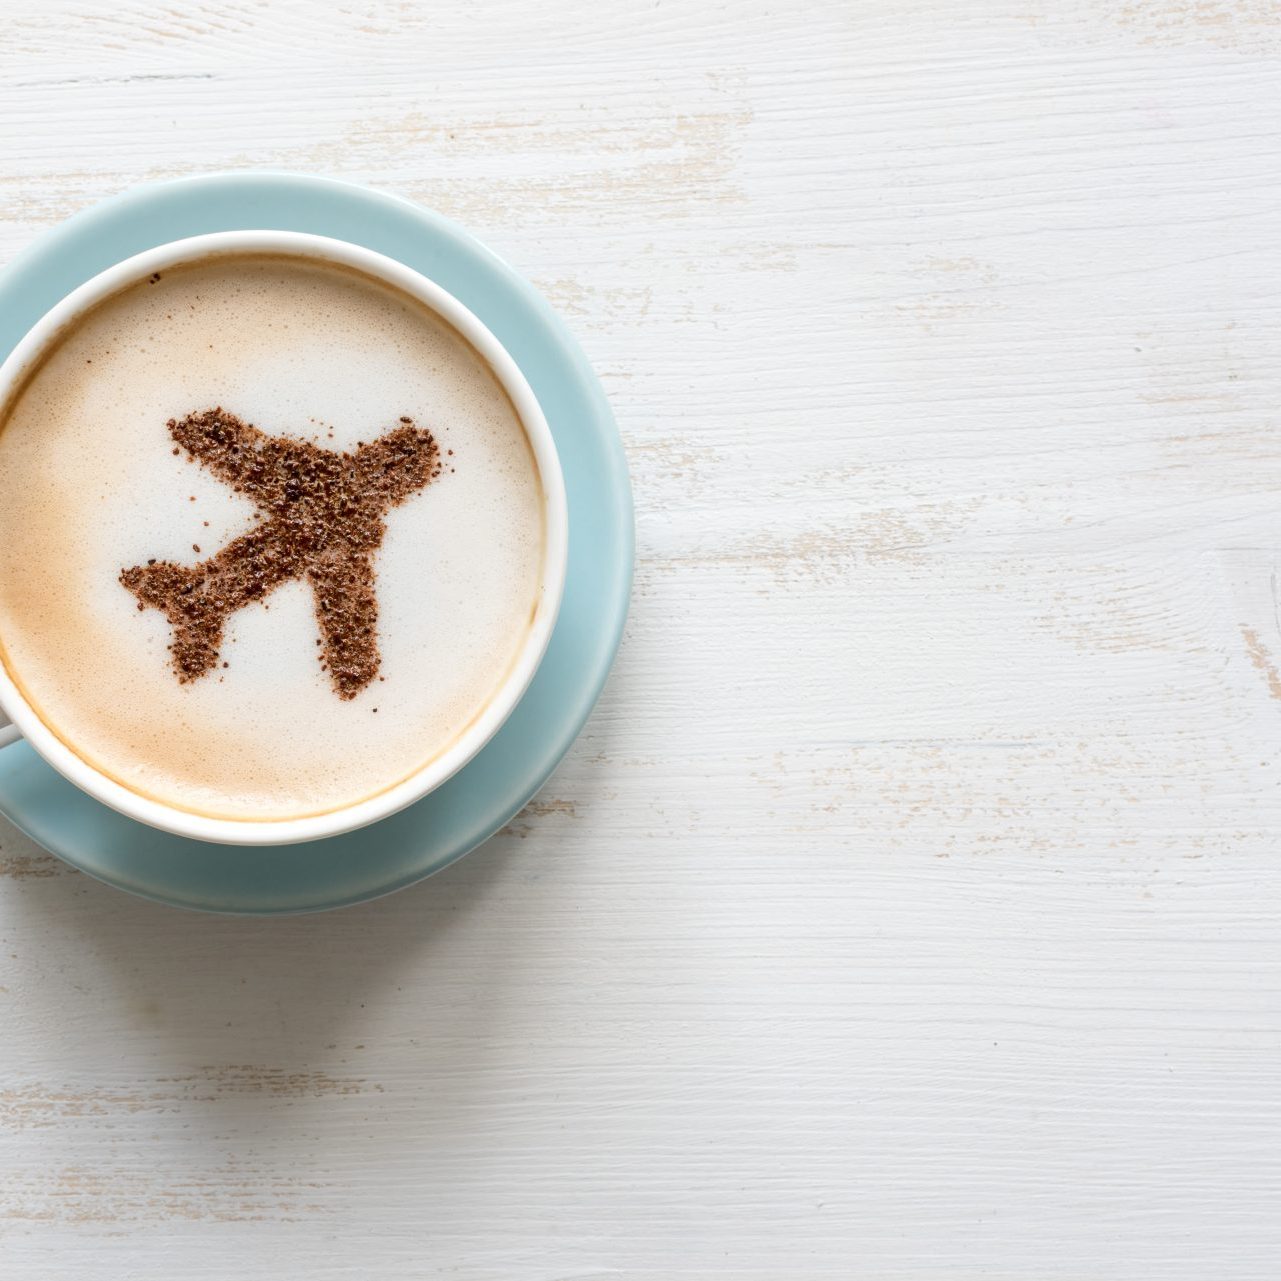 Airplane Made Of Cinnamon In Coffee. Cup Of Cuppuccino. Travel Concept